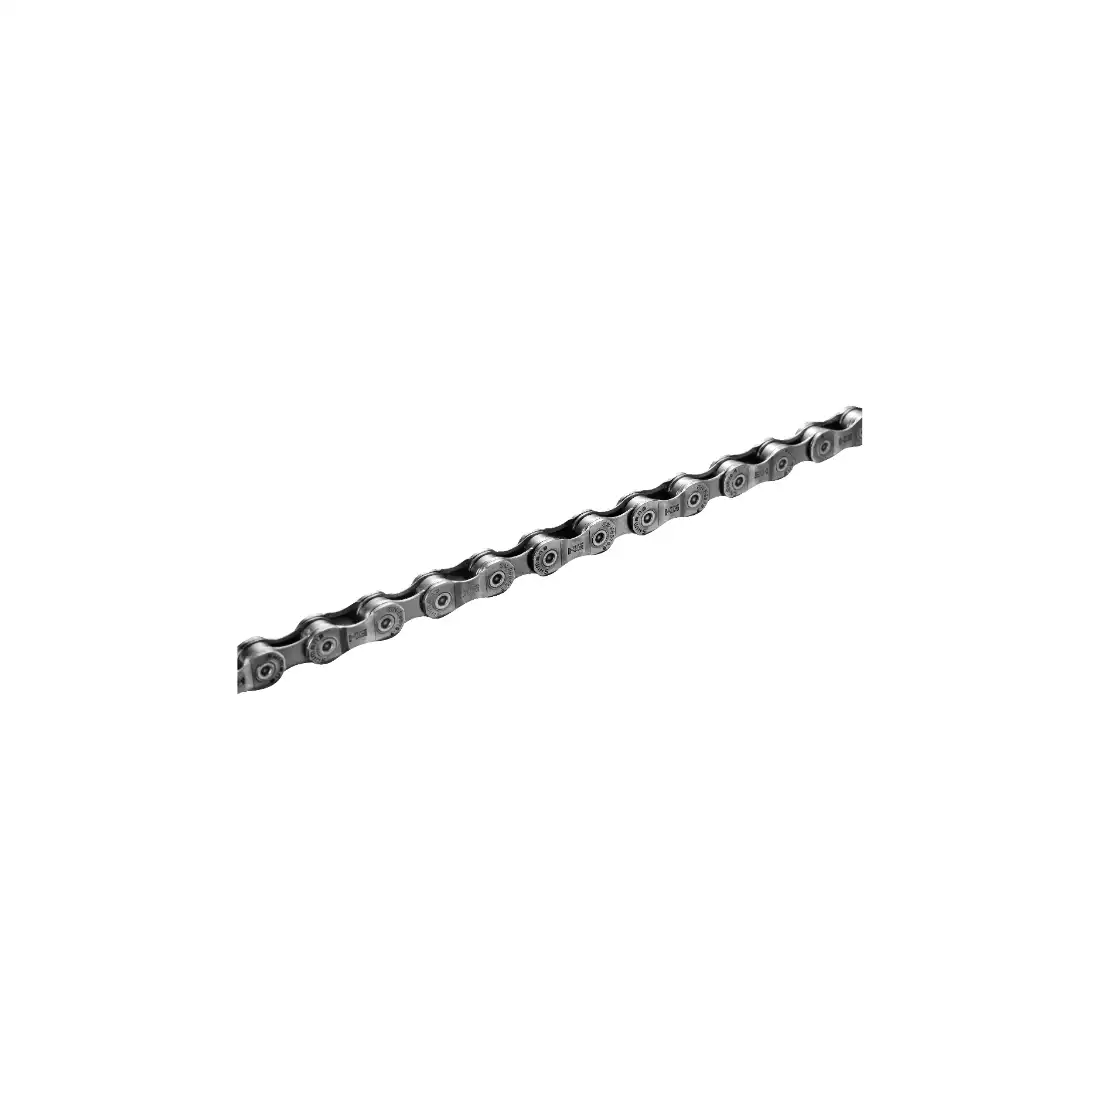 SHIMANO CN-E6070 Bicycle chain, 9-speed, 138 links, silver